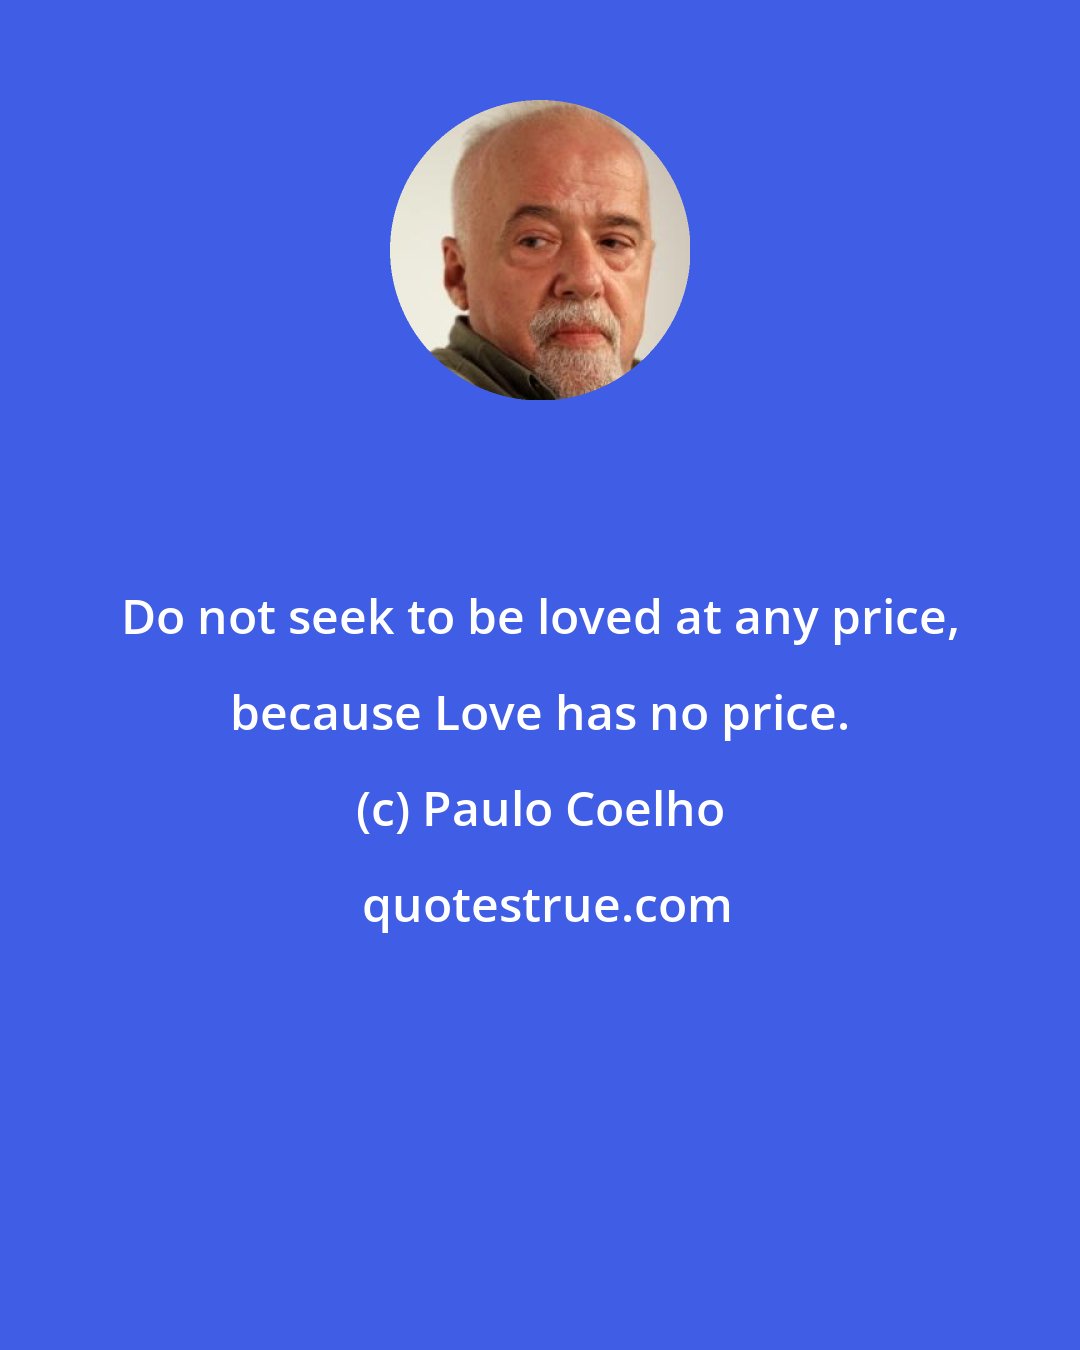 Paulo Coelho: Do not seek to be loved at any price, because Love has no price.